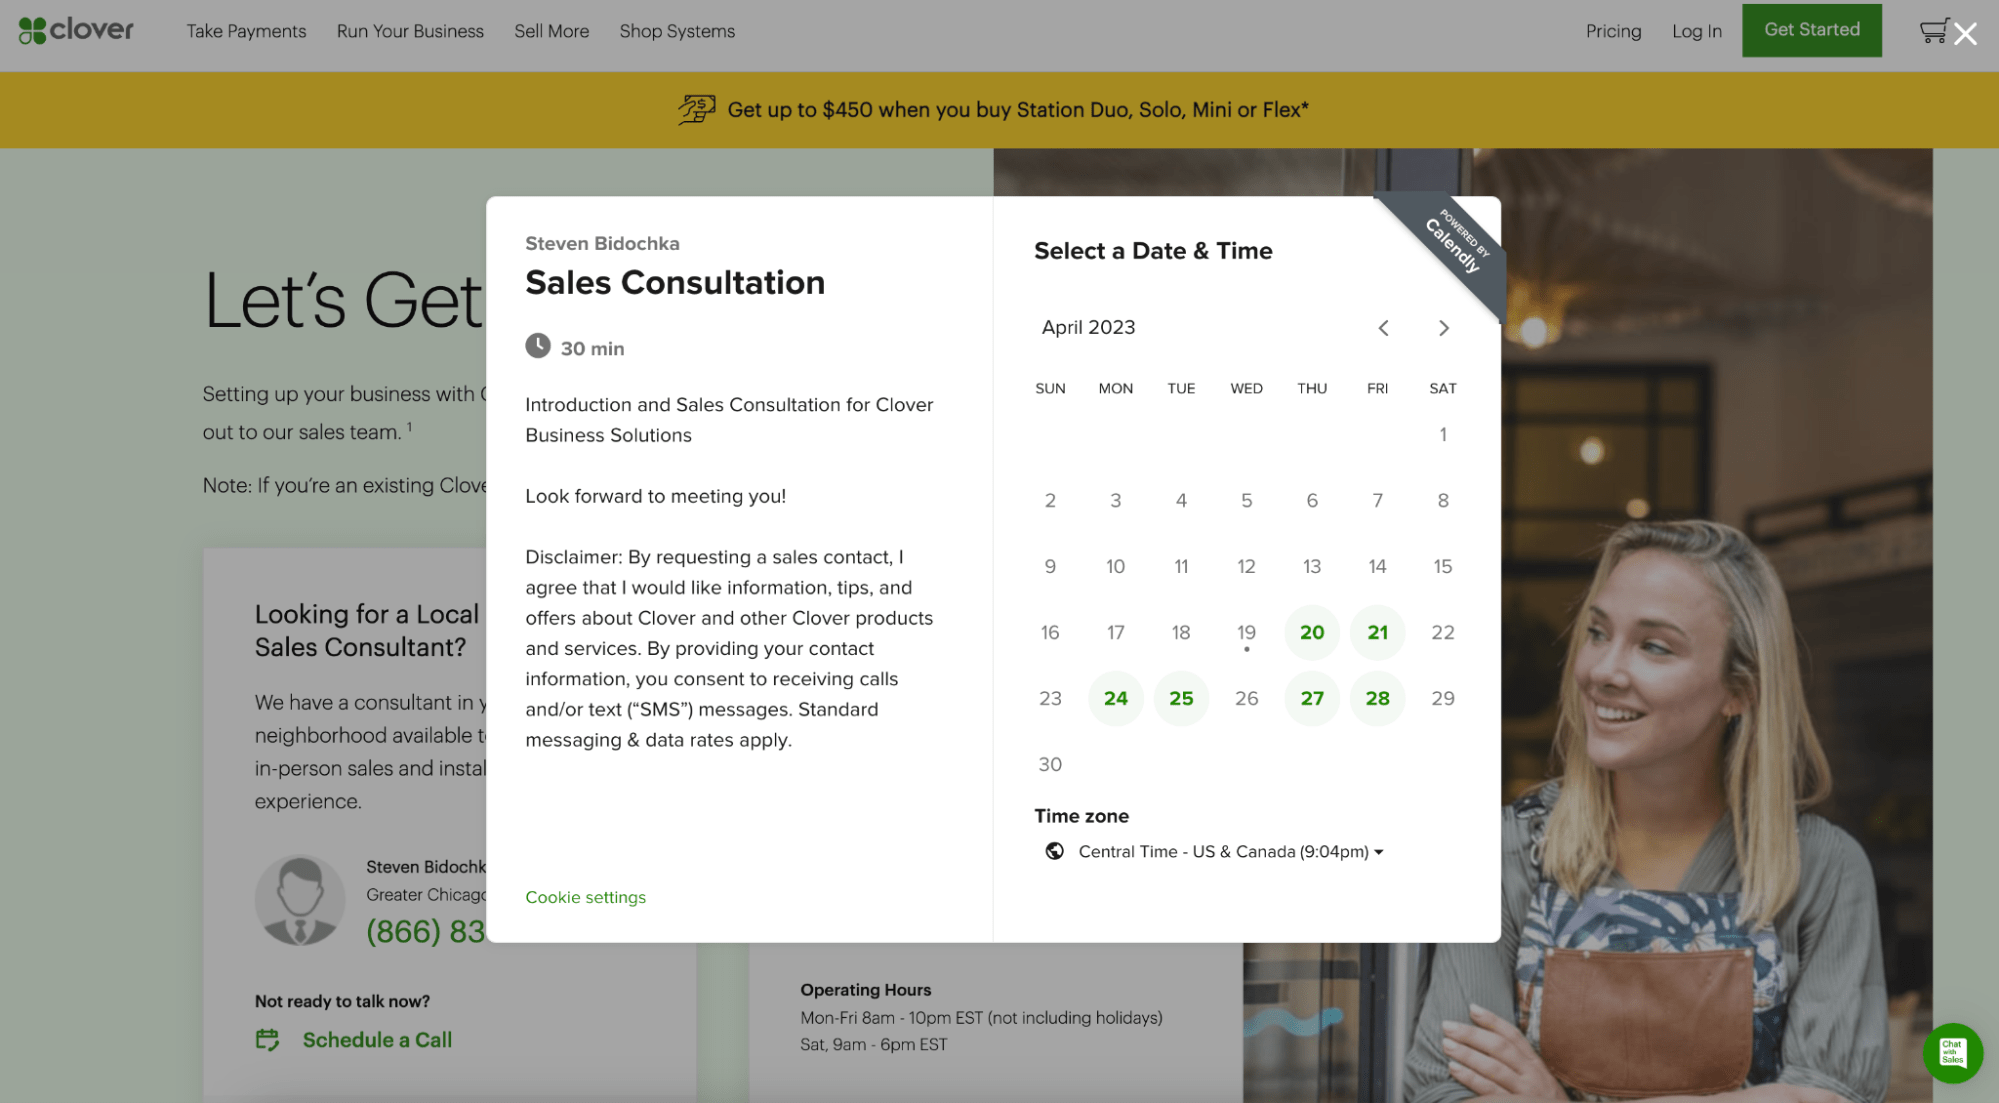 Screenshot of Clover's "Get Started" page. A pop-up shows the Calendly booking page for a "Sales Consultation" event.